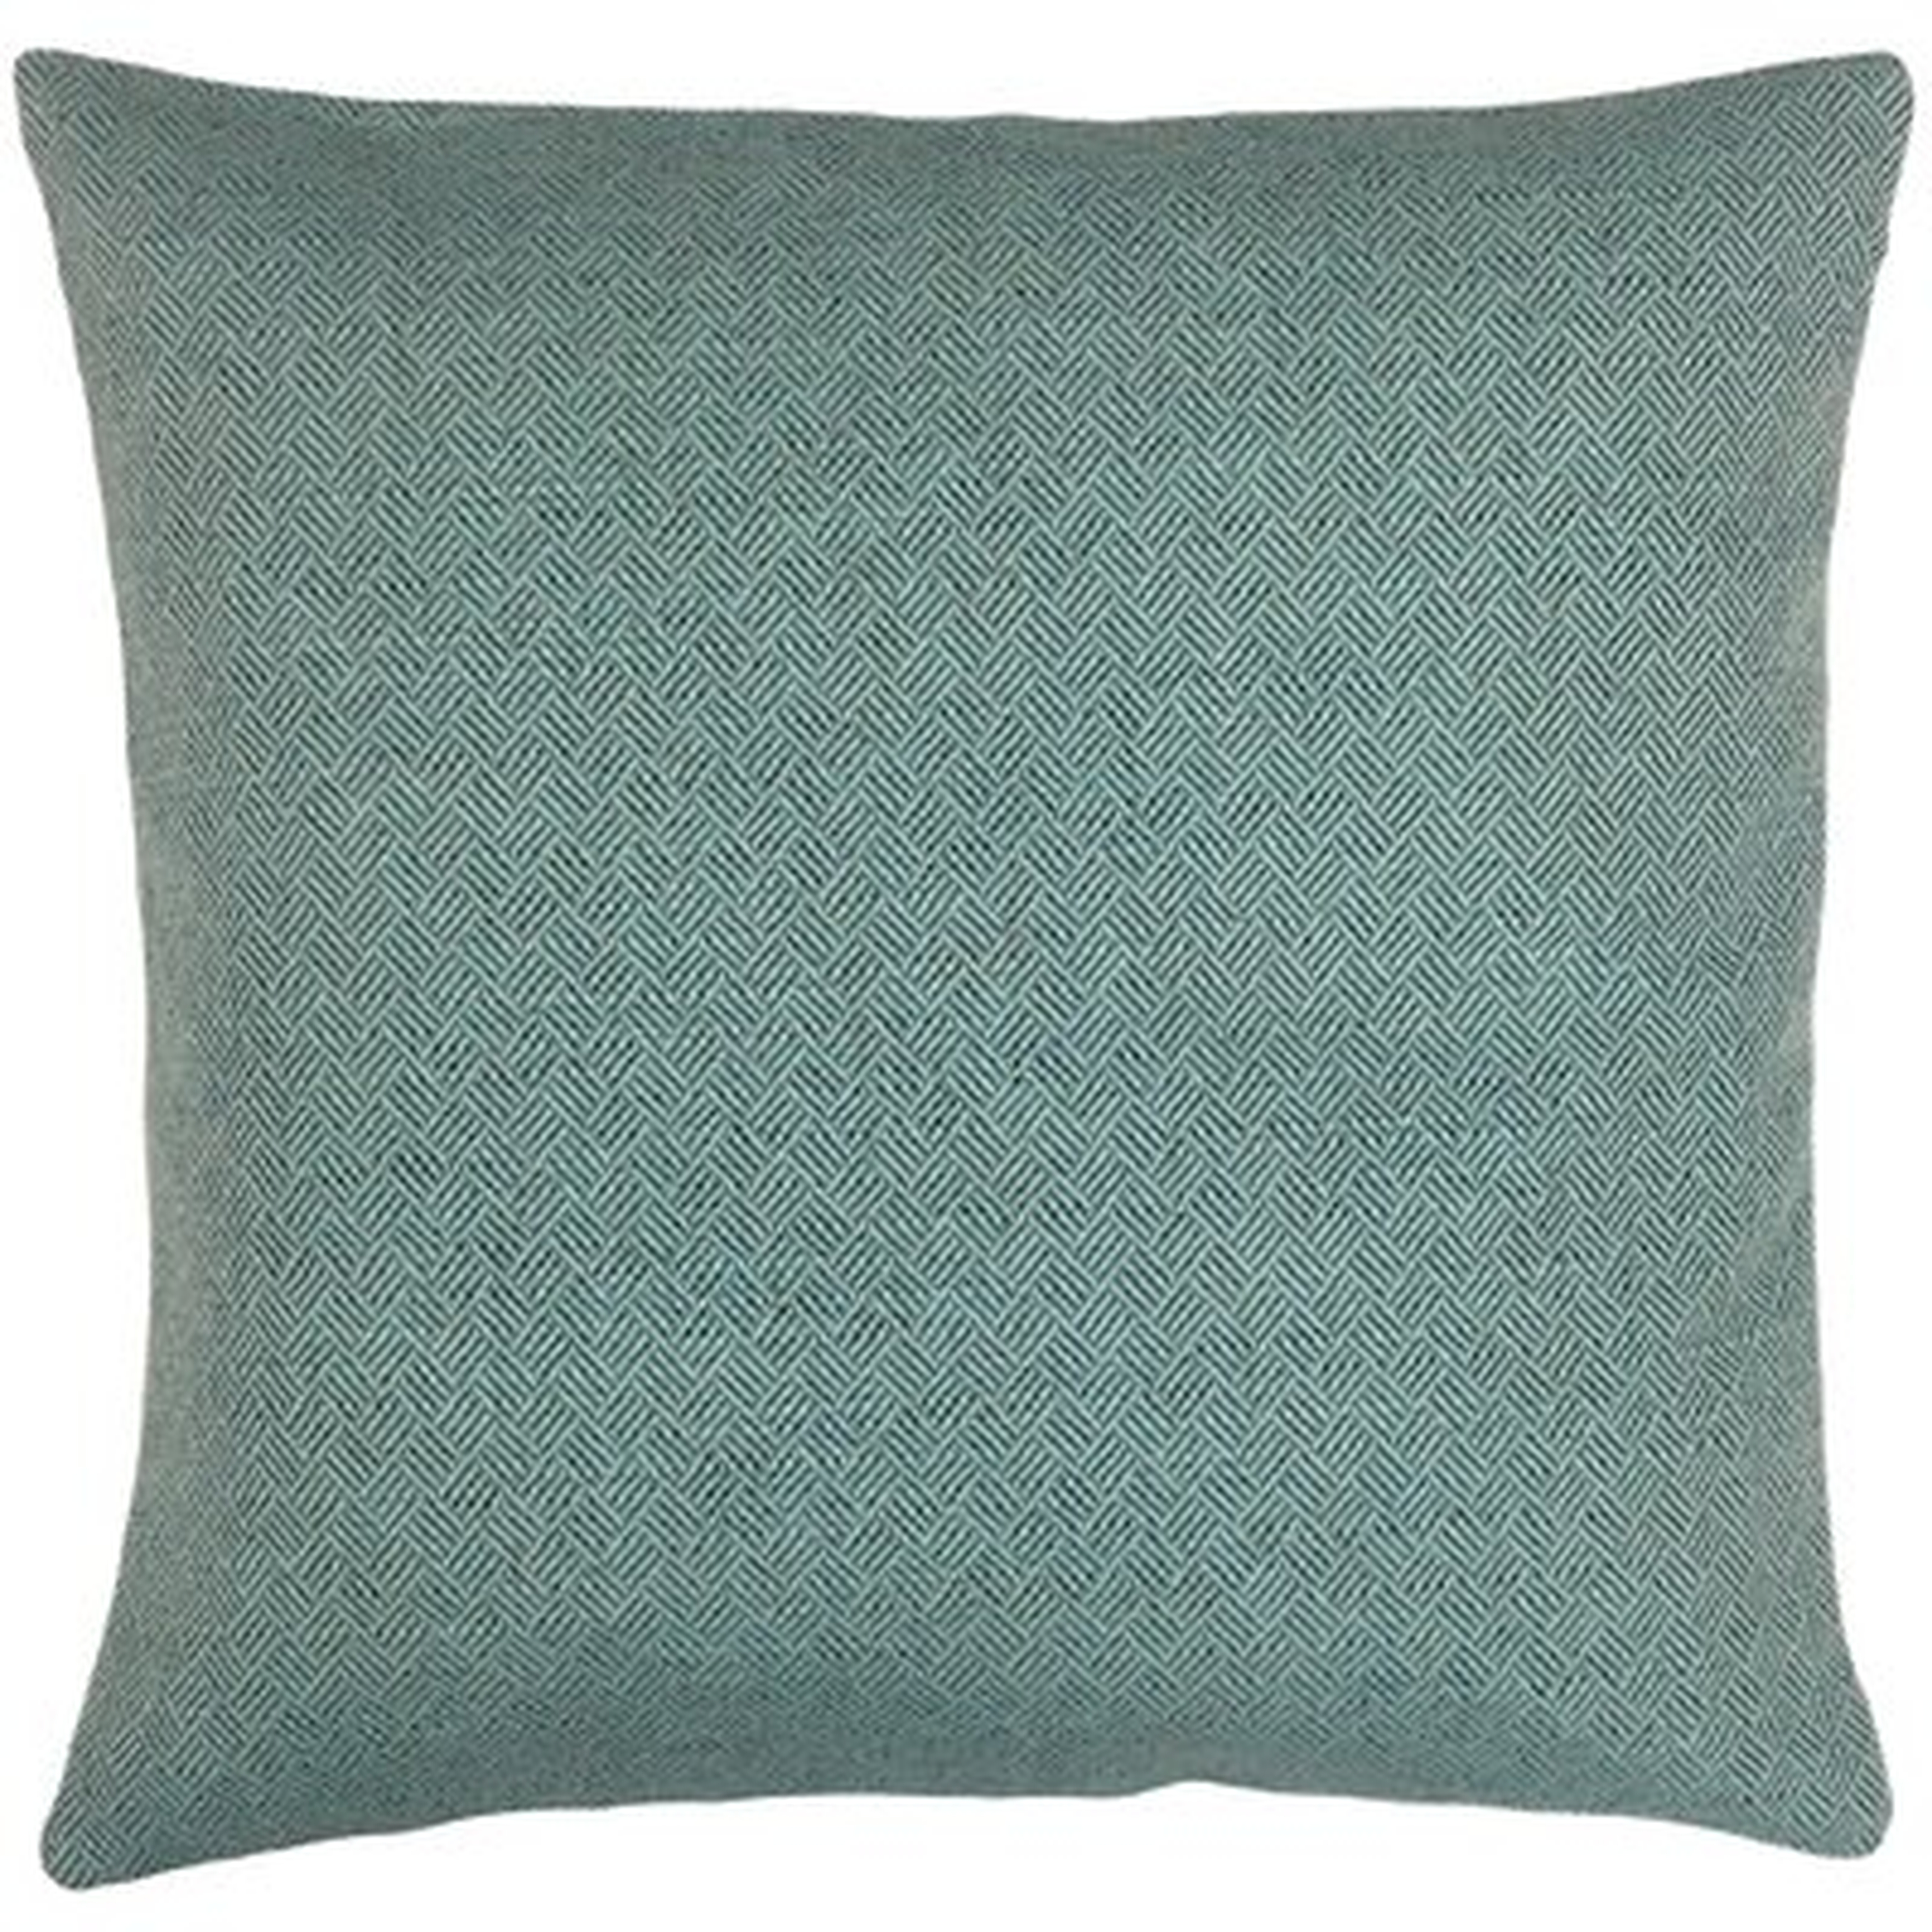 Wallner Outdoor Square Pillow Cover and Insert - Wayfair